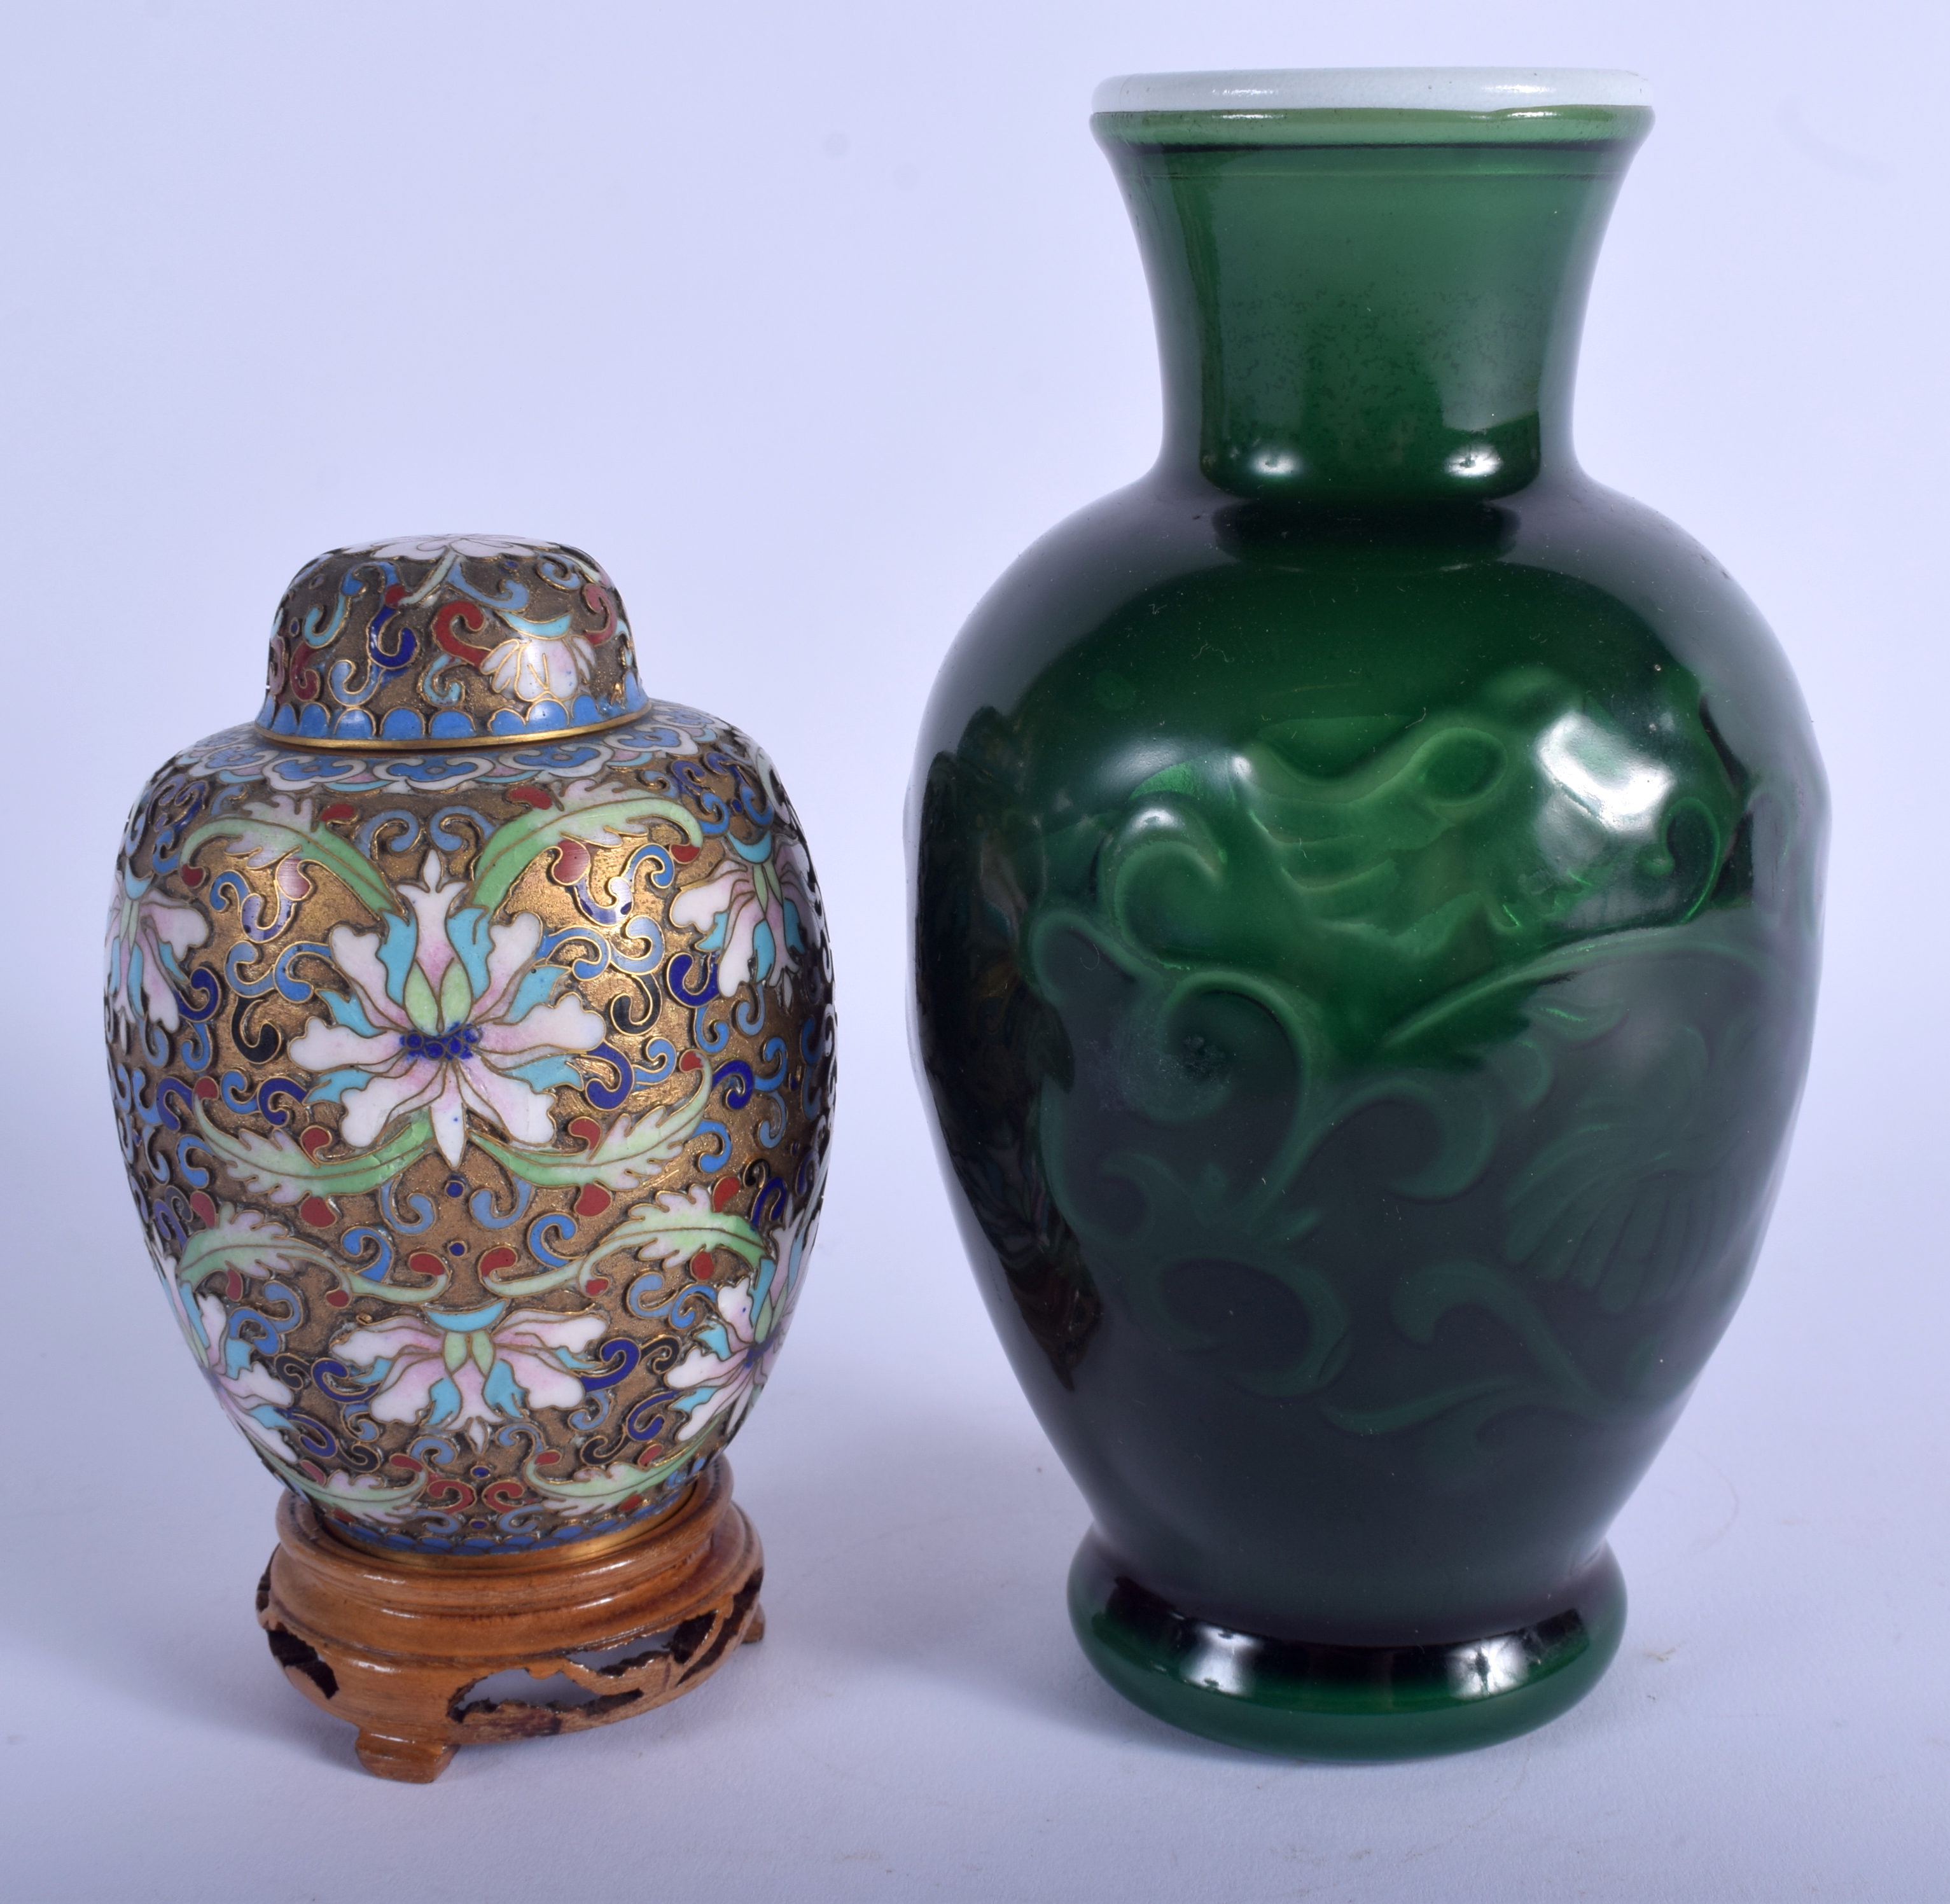 AN EARLY 20TH CENTURY CHINESE CLOISONNE ENAMEL VASE AND COVER together with a Peking style vase. La - Image 2 of 10